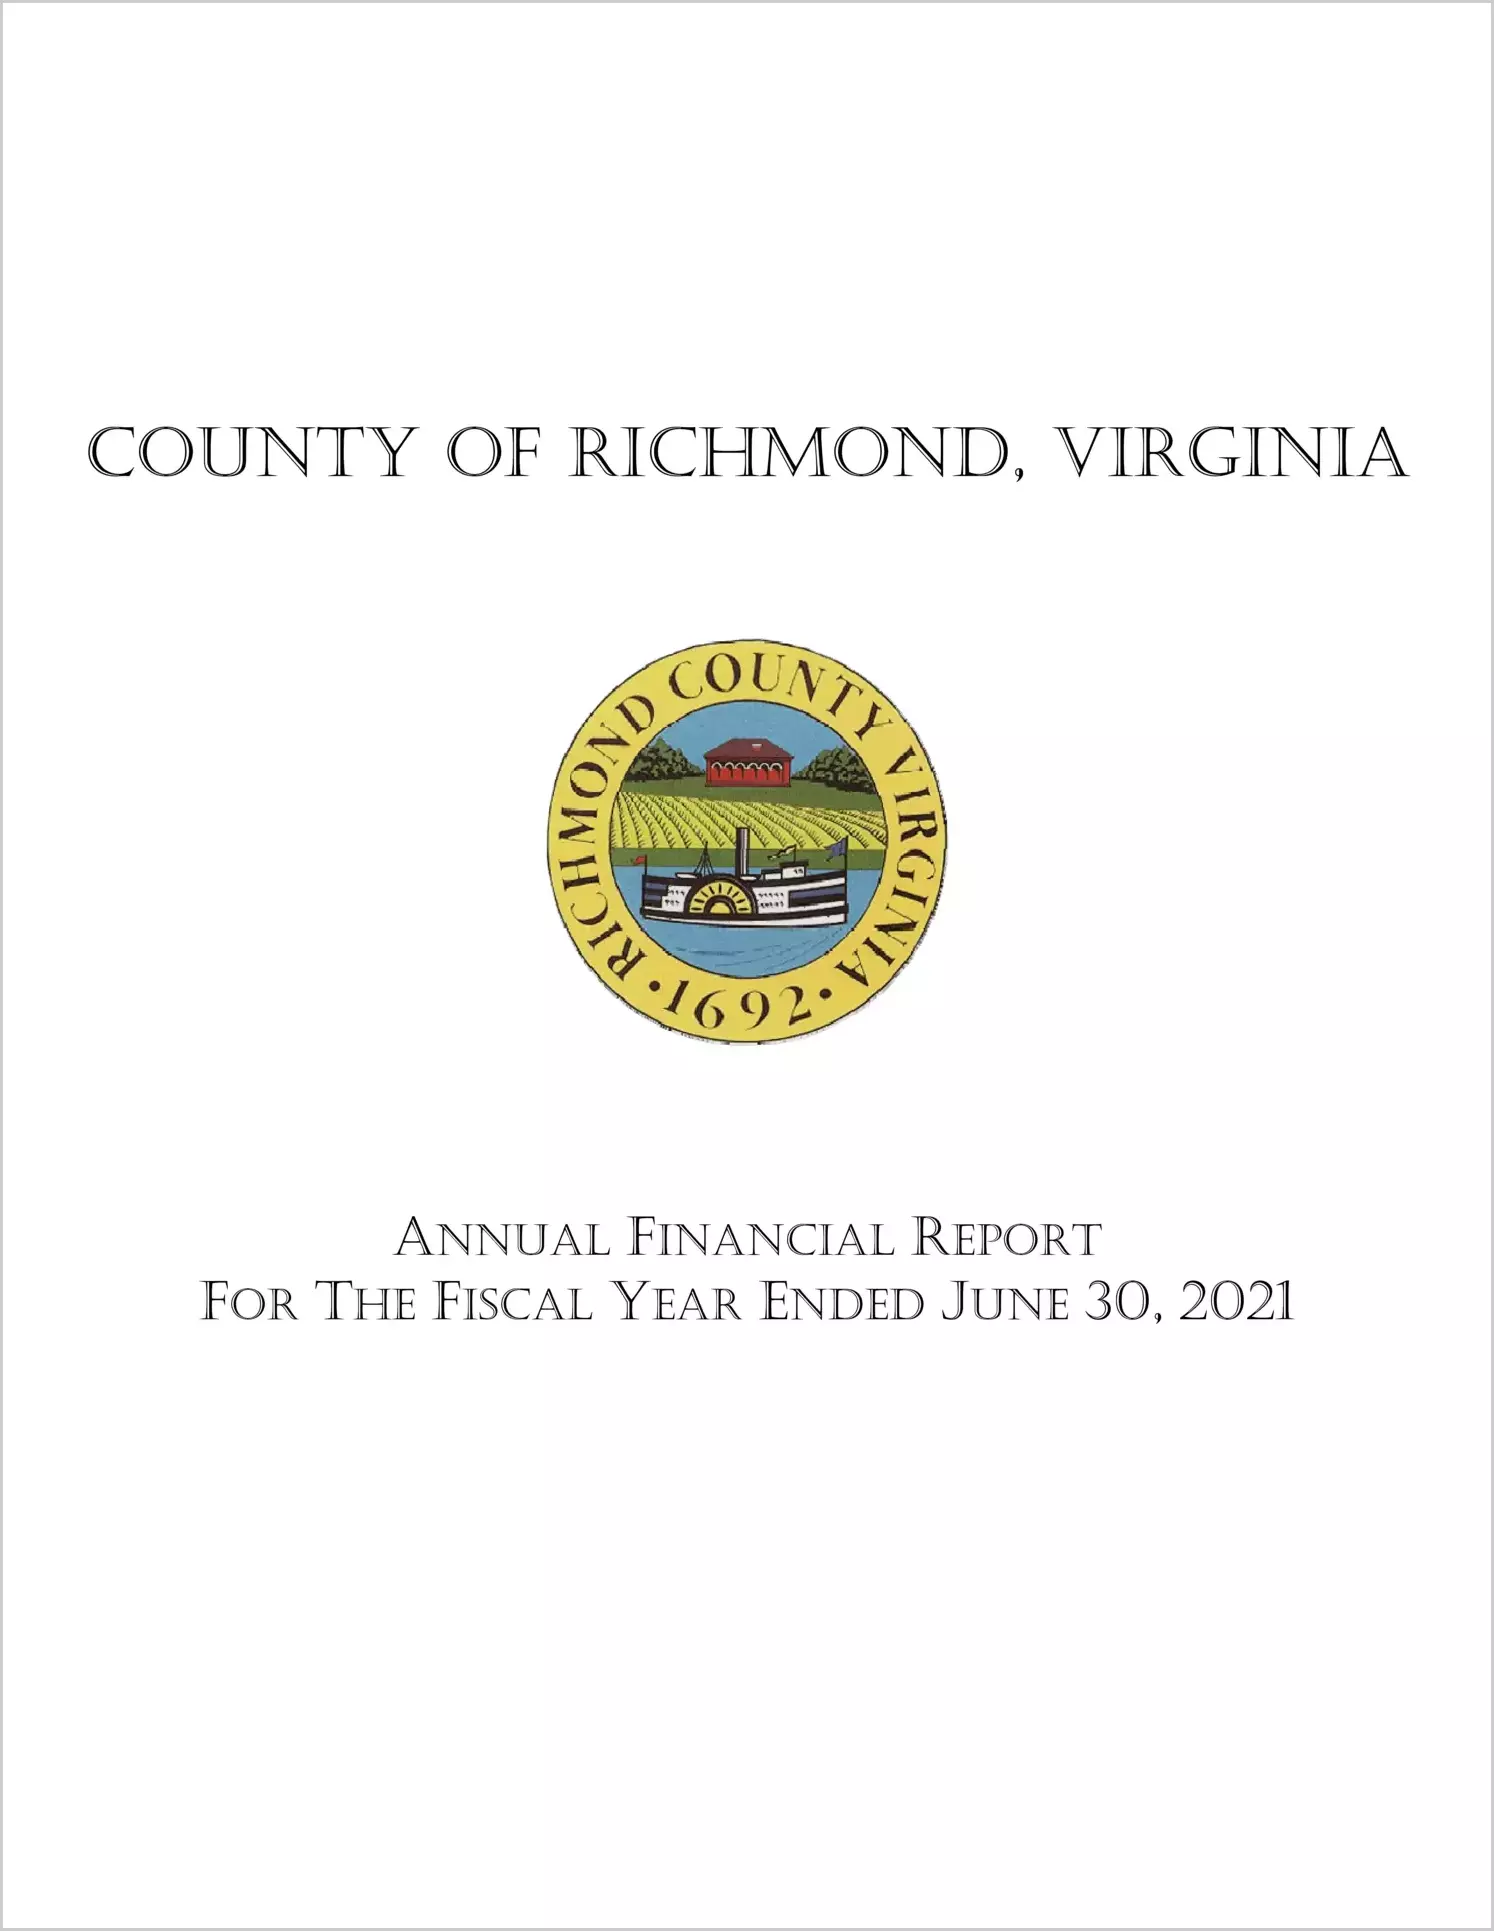 2021 Annual Financial Report for County of Richmond